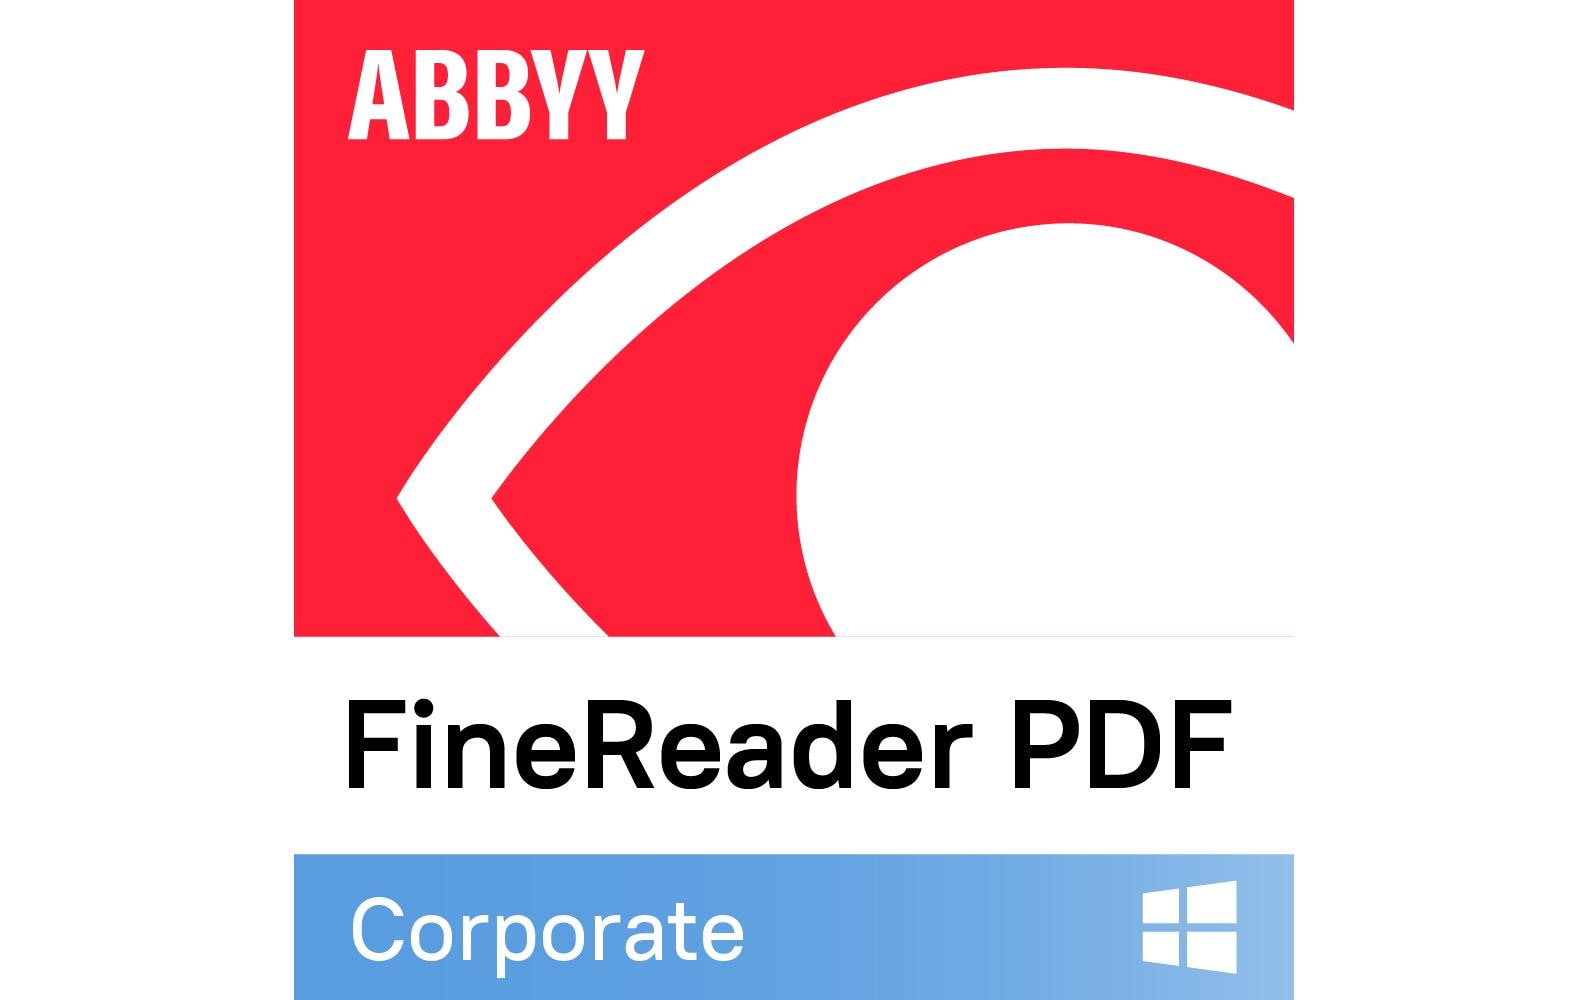 ABBYY FineReader PDF Corporate ESD, Subs., Single User, 3 Jahre